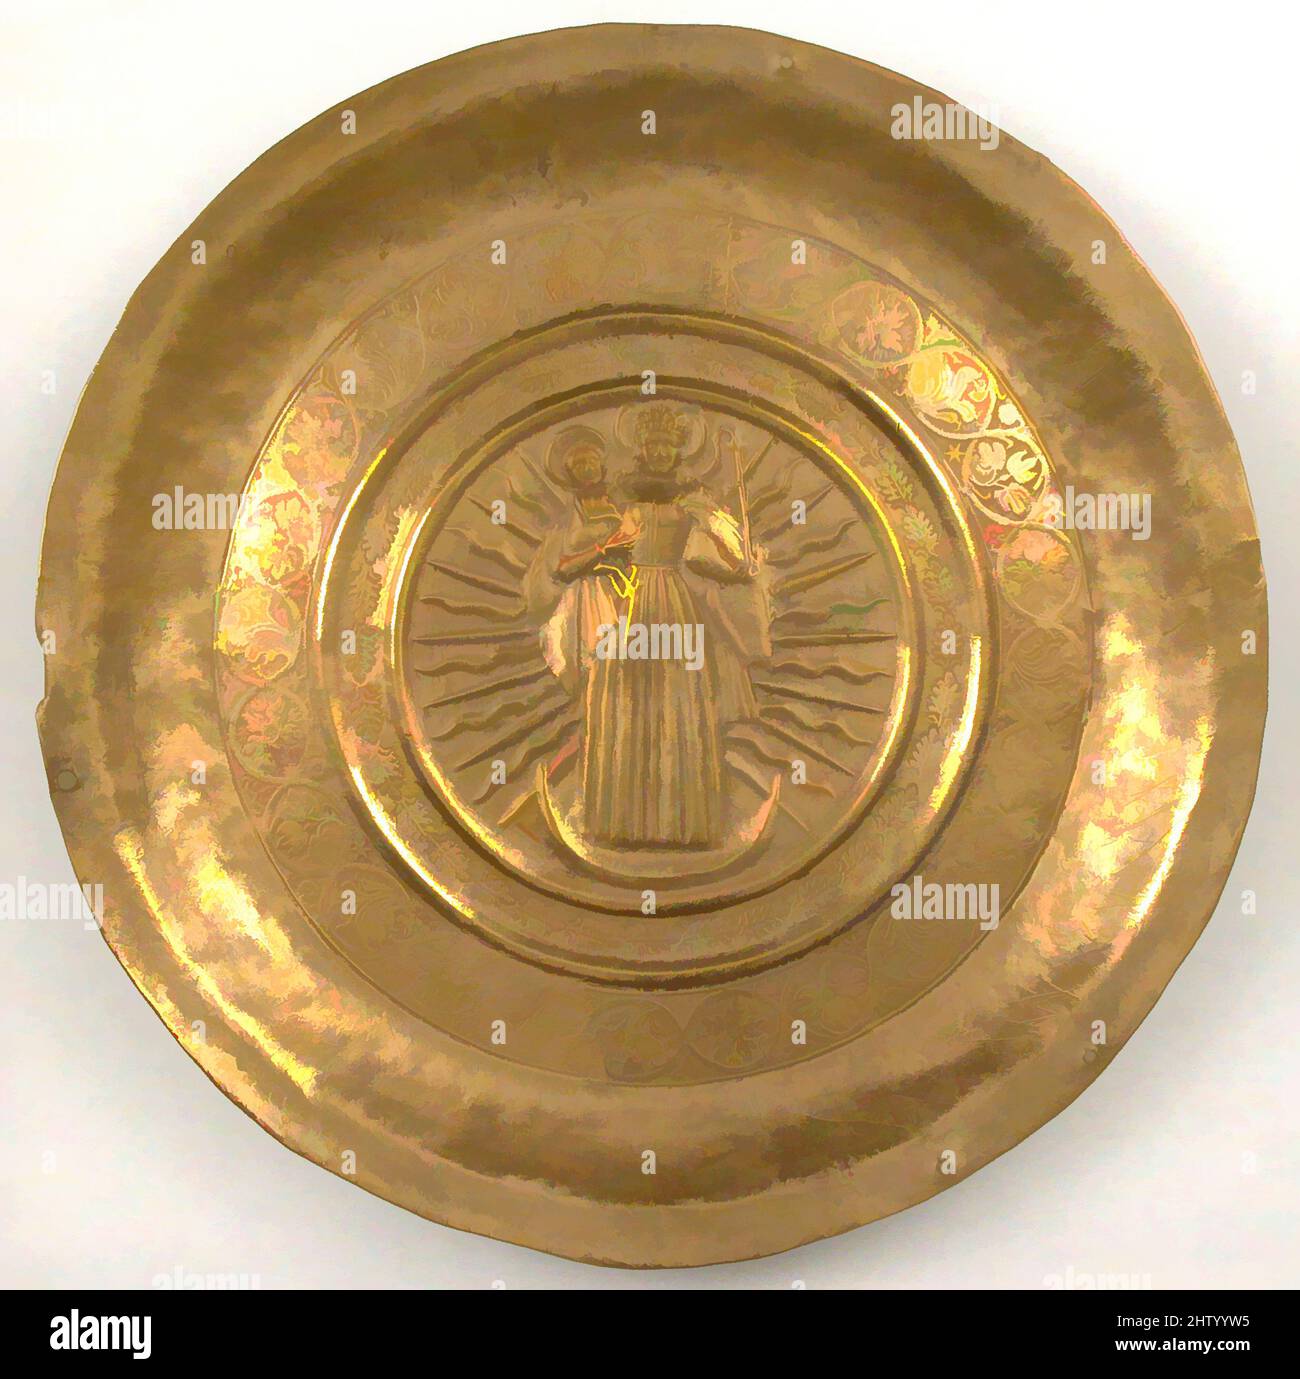 Art inspired by Dish, early 16th century, German, Brass, Overall: 12 7/16 x 7/8 in. (31.6 x 2.3 cm), Metalwork-Brass, Classic works modernized by Artotop with a splash of modernity. Shapes, color and value, eye-catching visual impact on art. Emotions through freedom of artworks in a contemporary way. A timeless message pursuing a wildly creative new direction. Artists turning to the digital medium and creating the Artotop NFT Stock Photo